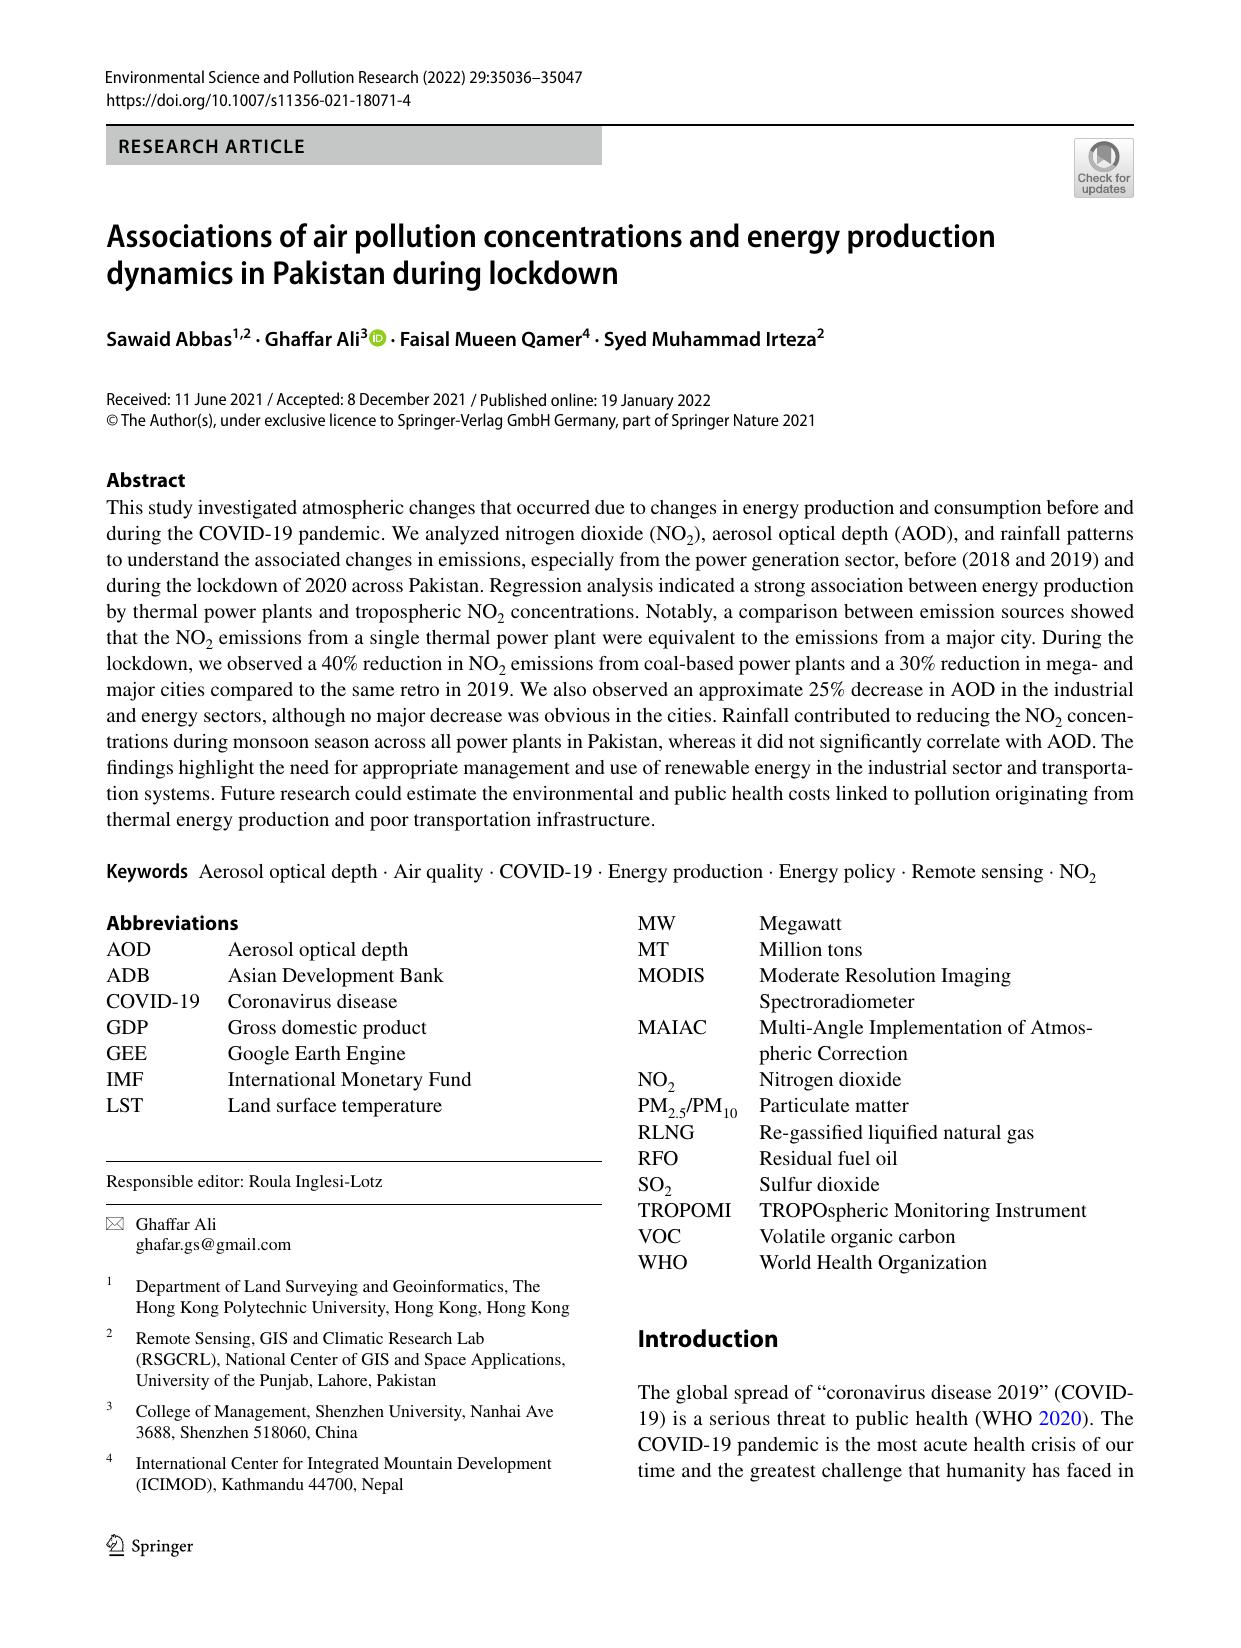 Associations of air pollution concentrations and energy production dynamics in Pakistan during lockdown